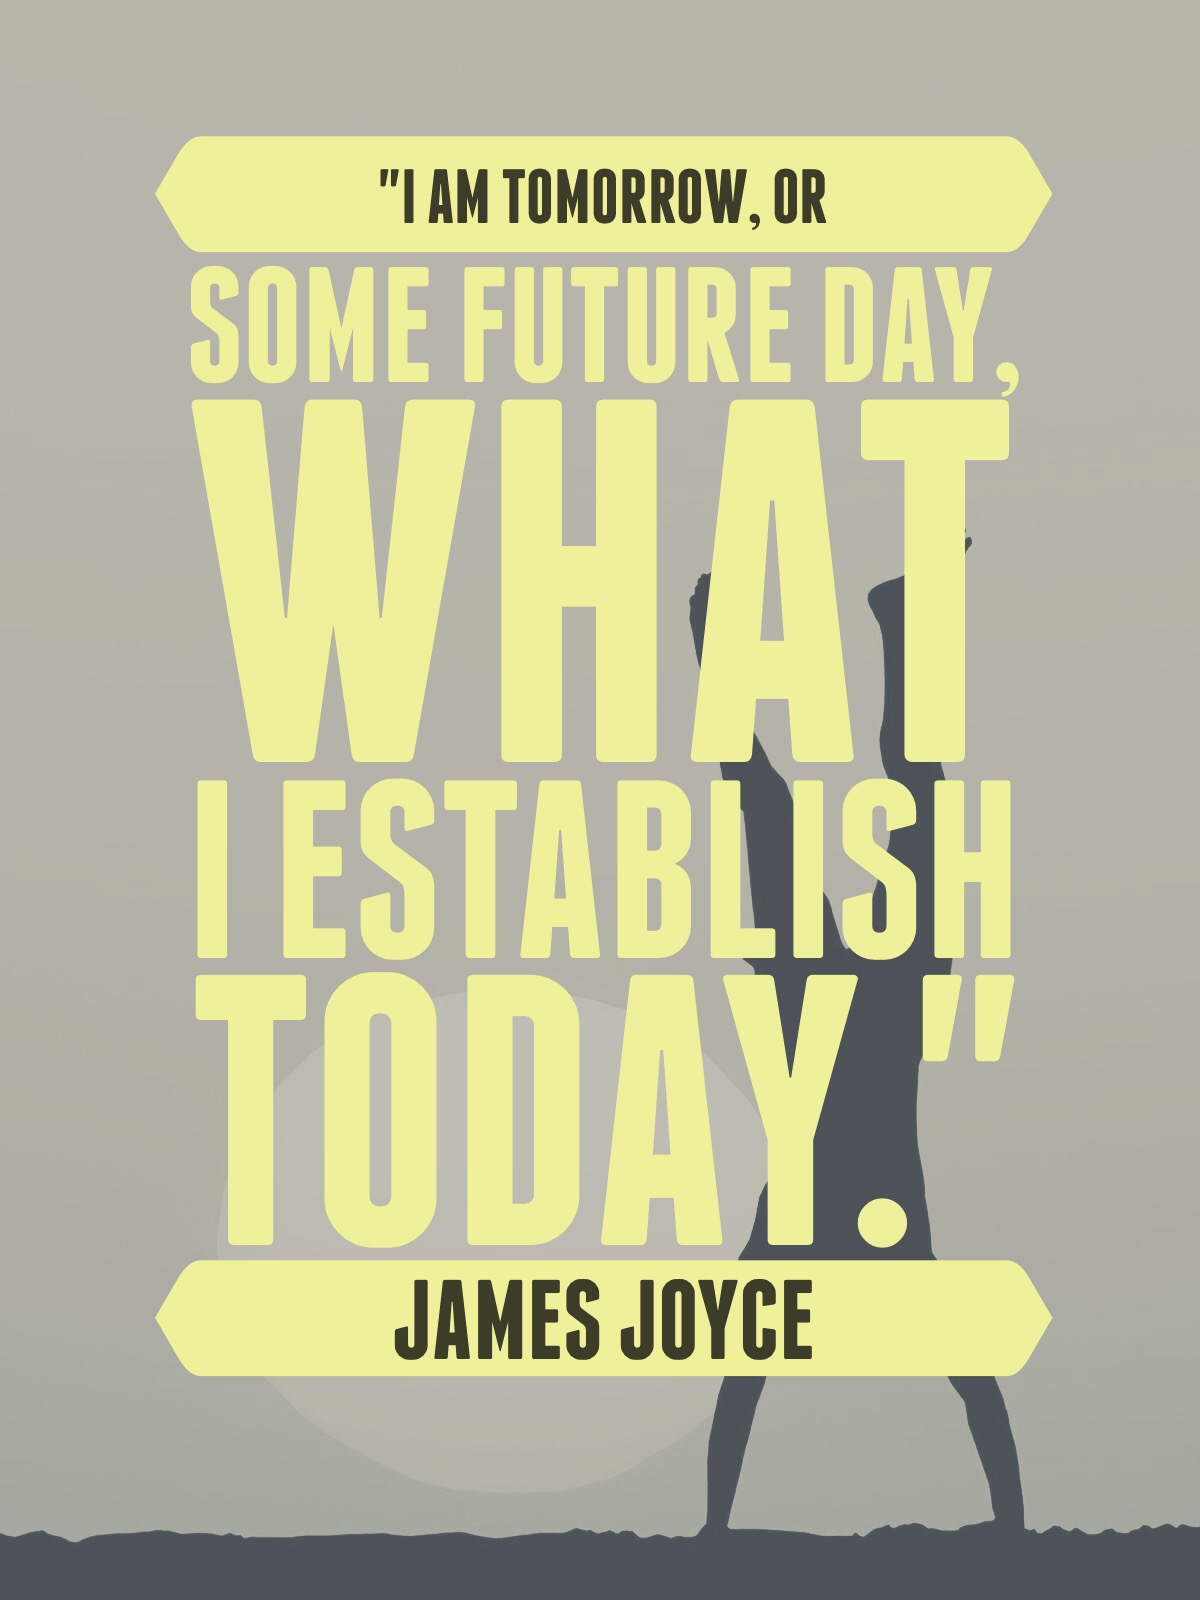 Literary Quotes For Teachers. James Joyce What I establish today